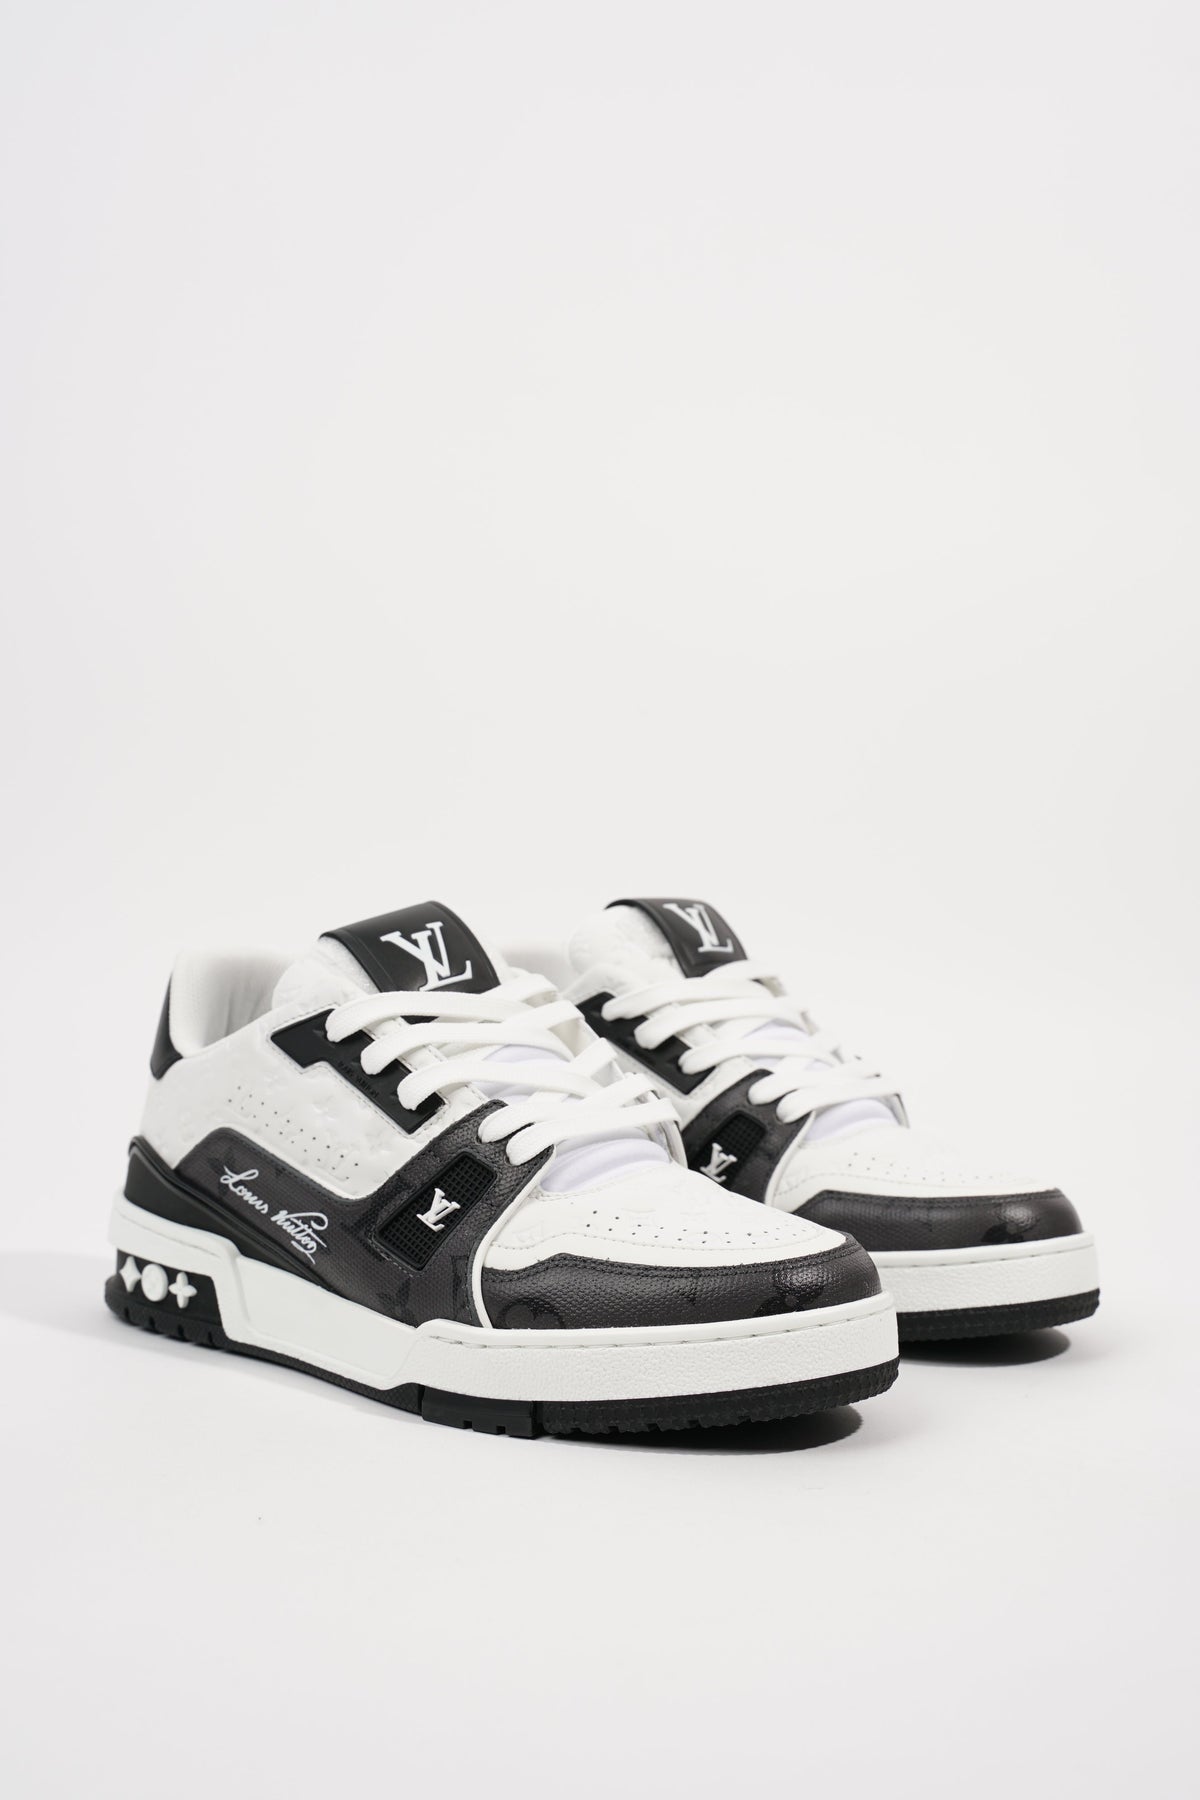 louis vuitton sneakers black and white